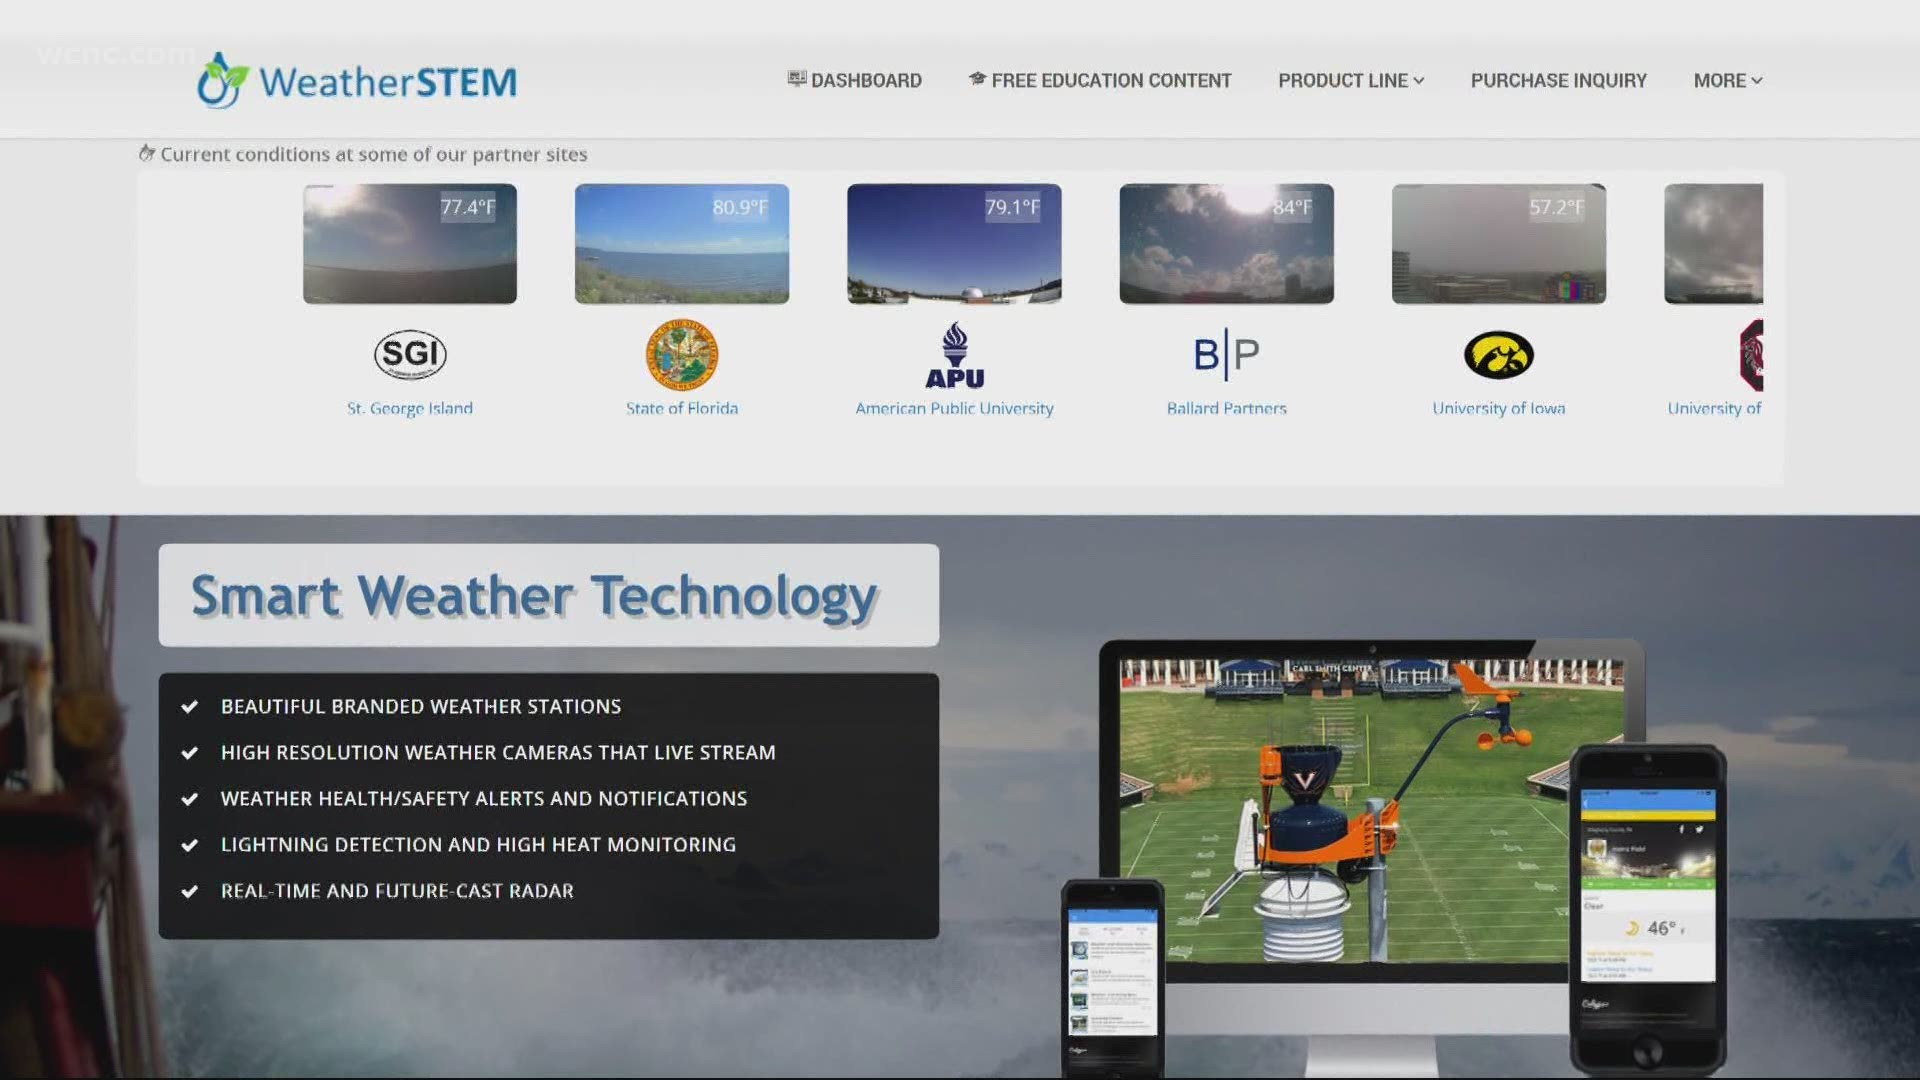 The Weather Stem program is making it easier to plan for weather events using social media.